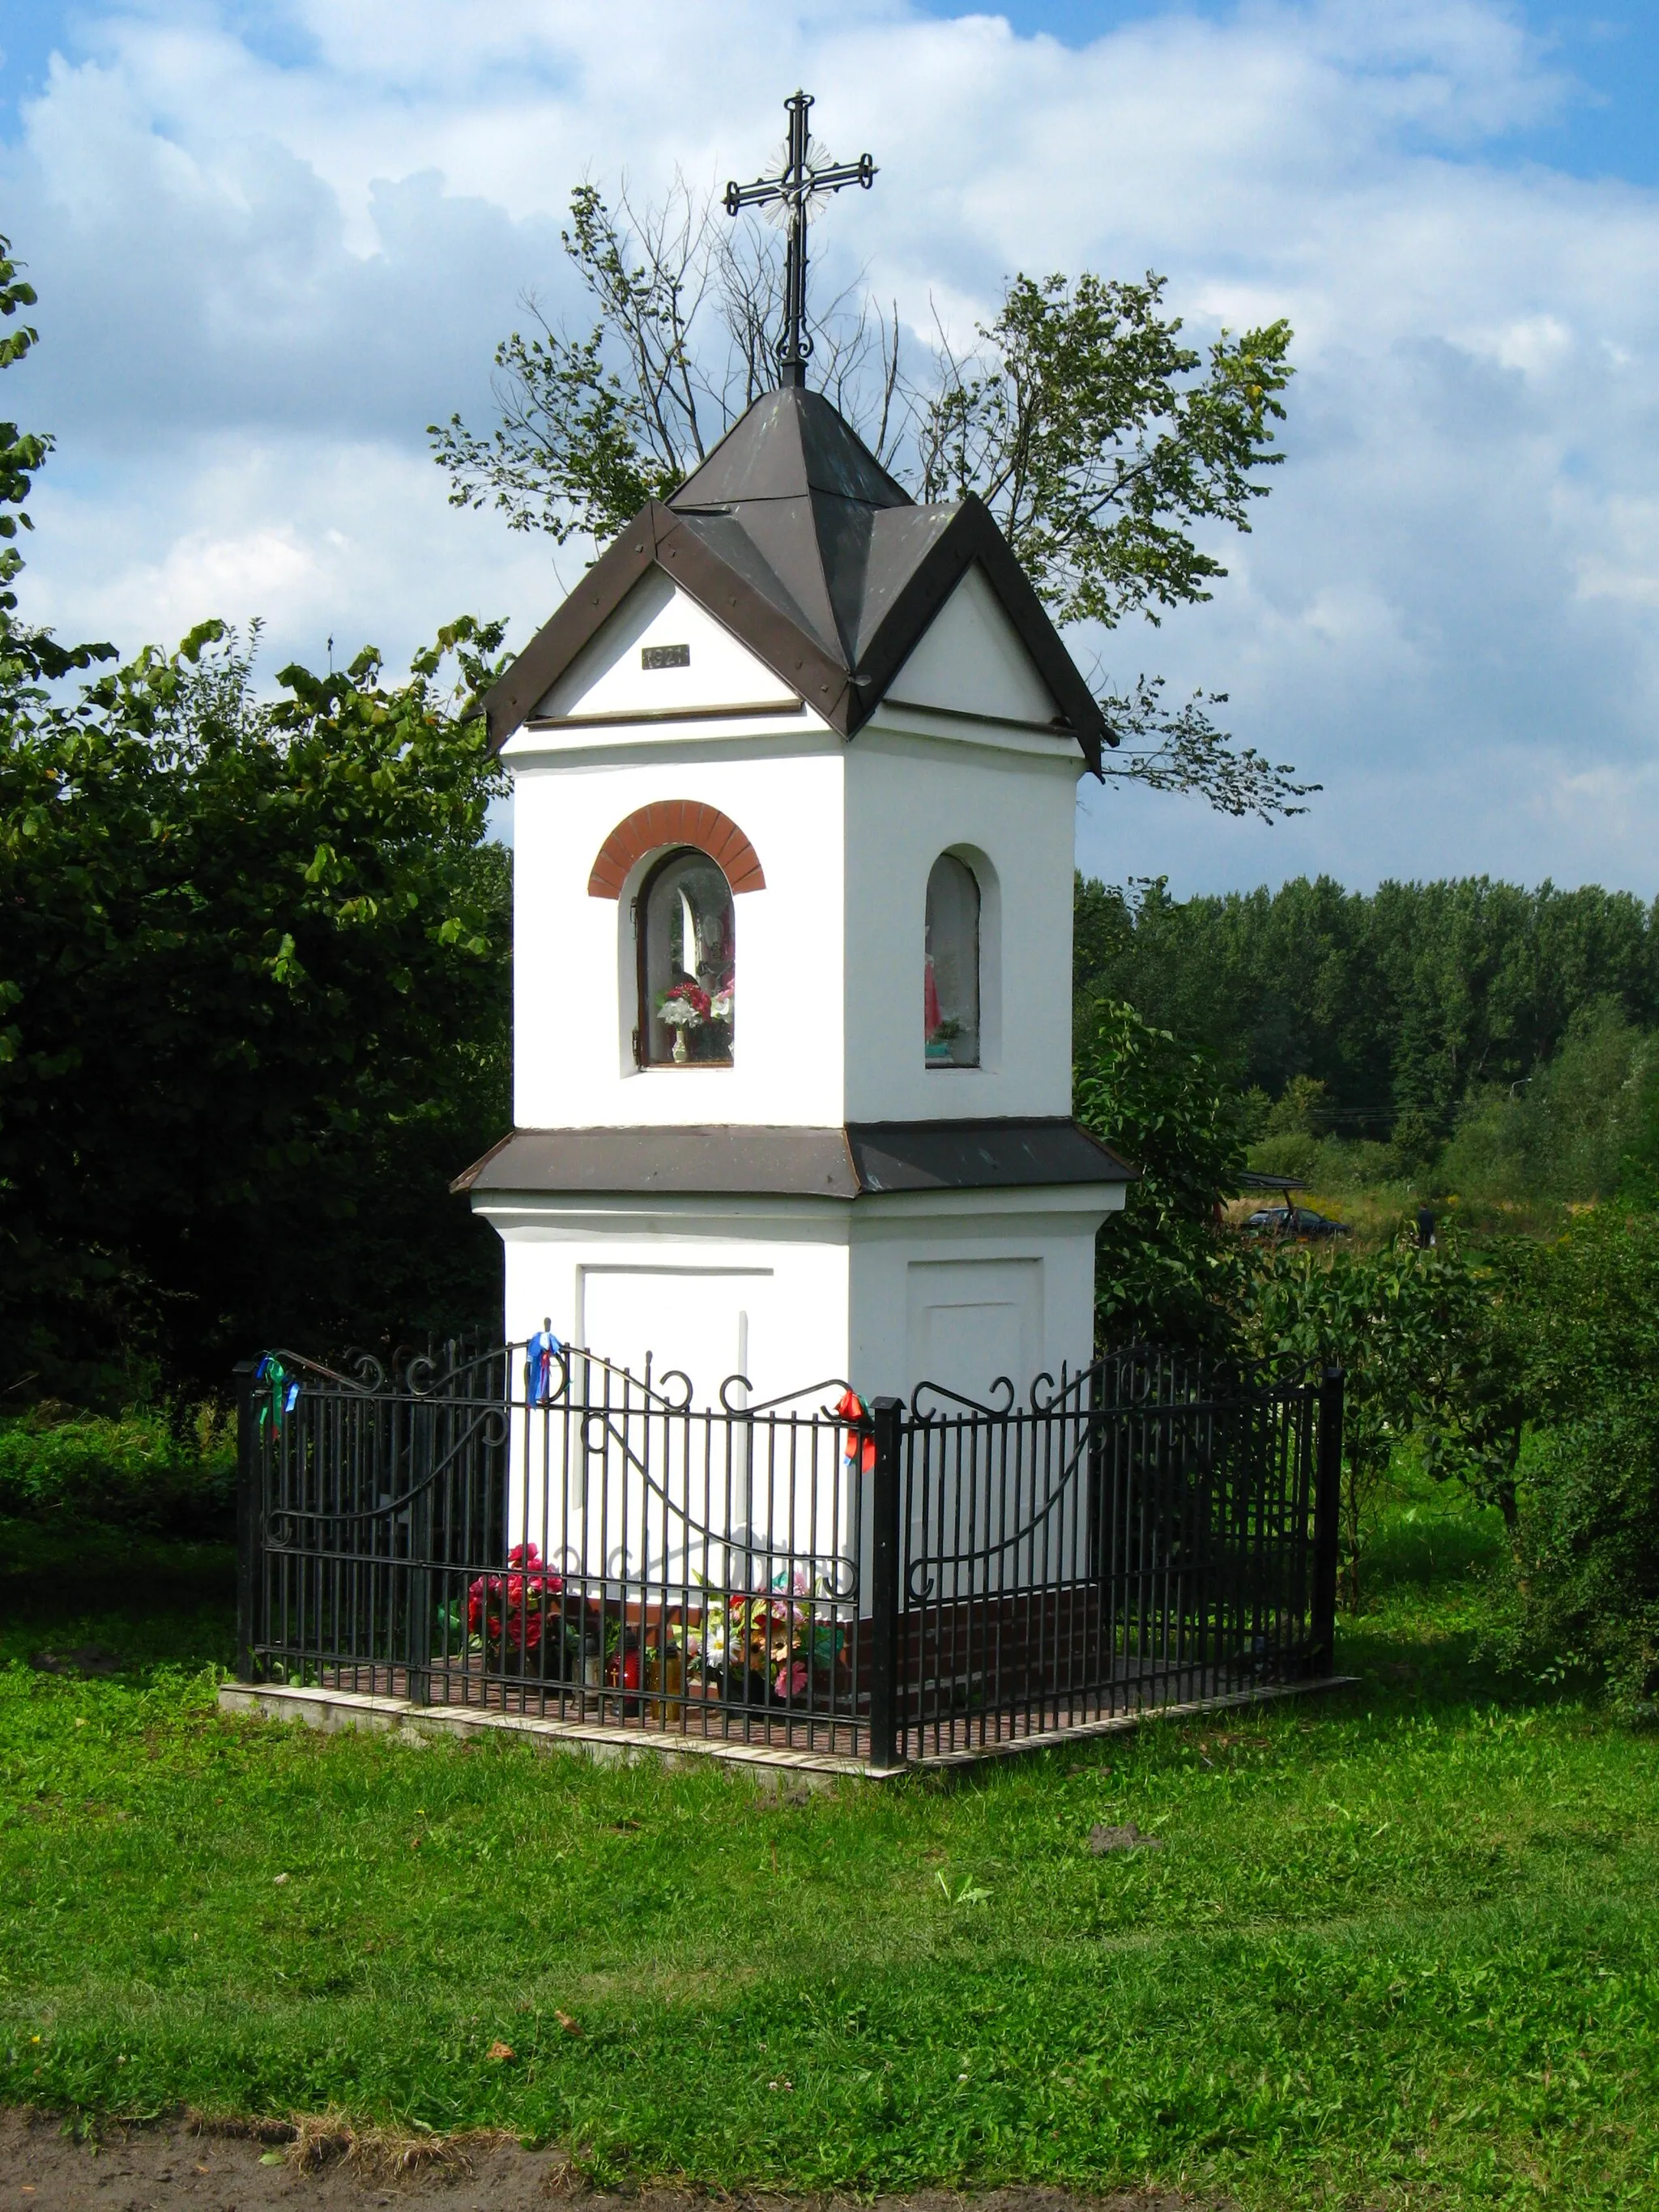 Photo showing: Shrine from year 1921 by the Mostowa st. at Łapy